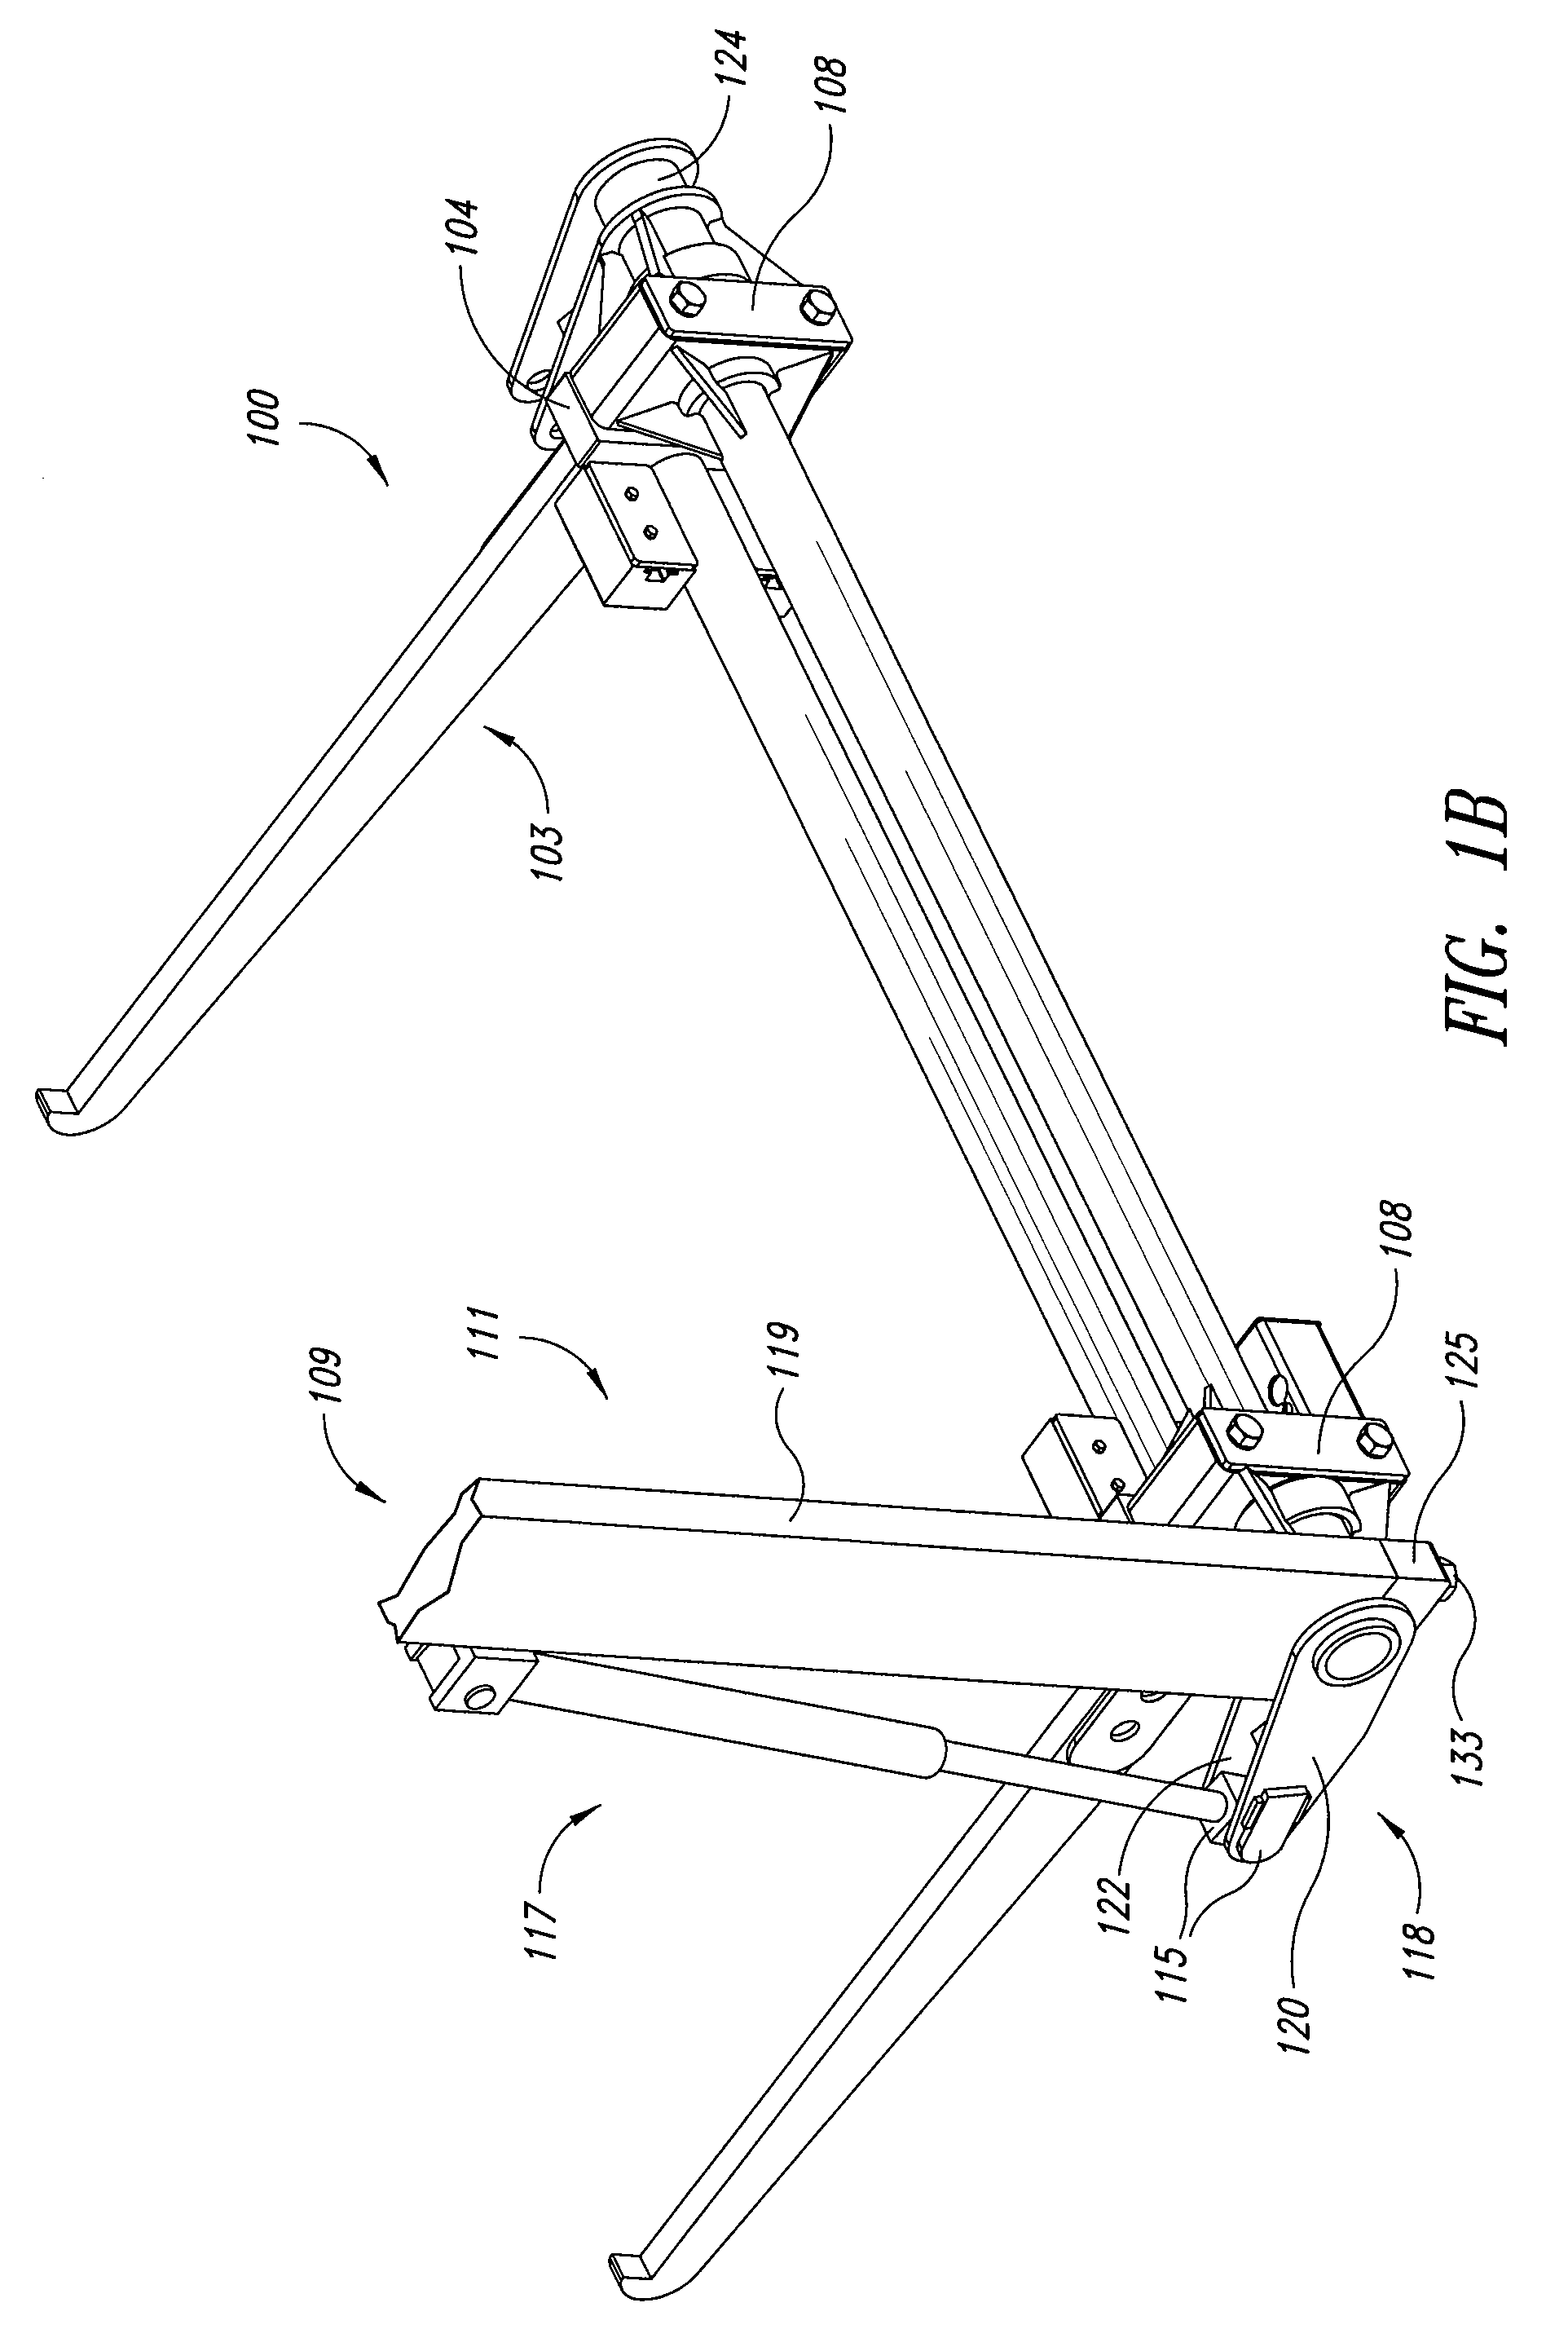 Vehicle load lift and weighing system and method